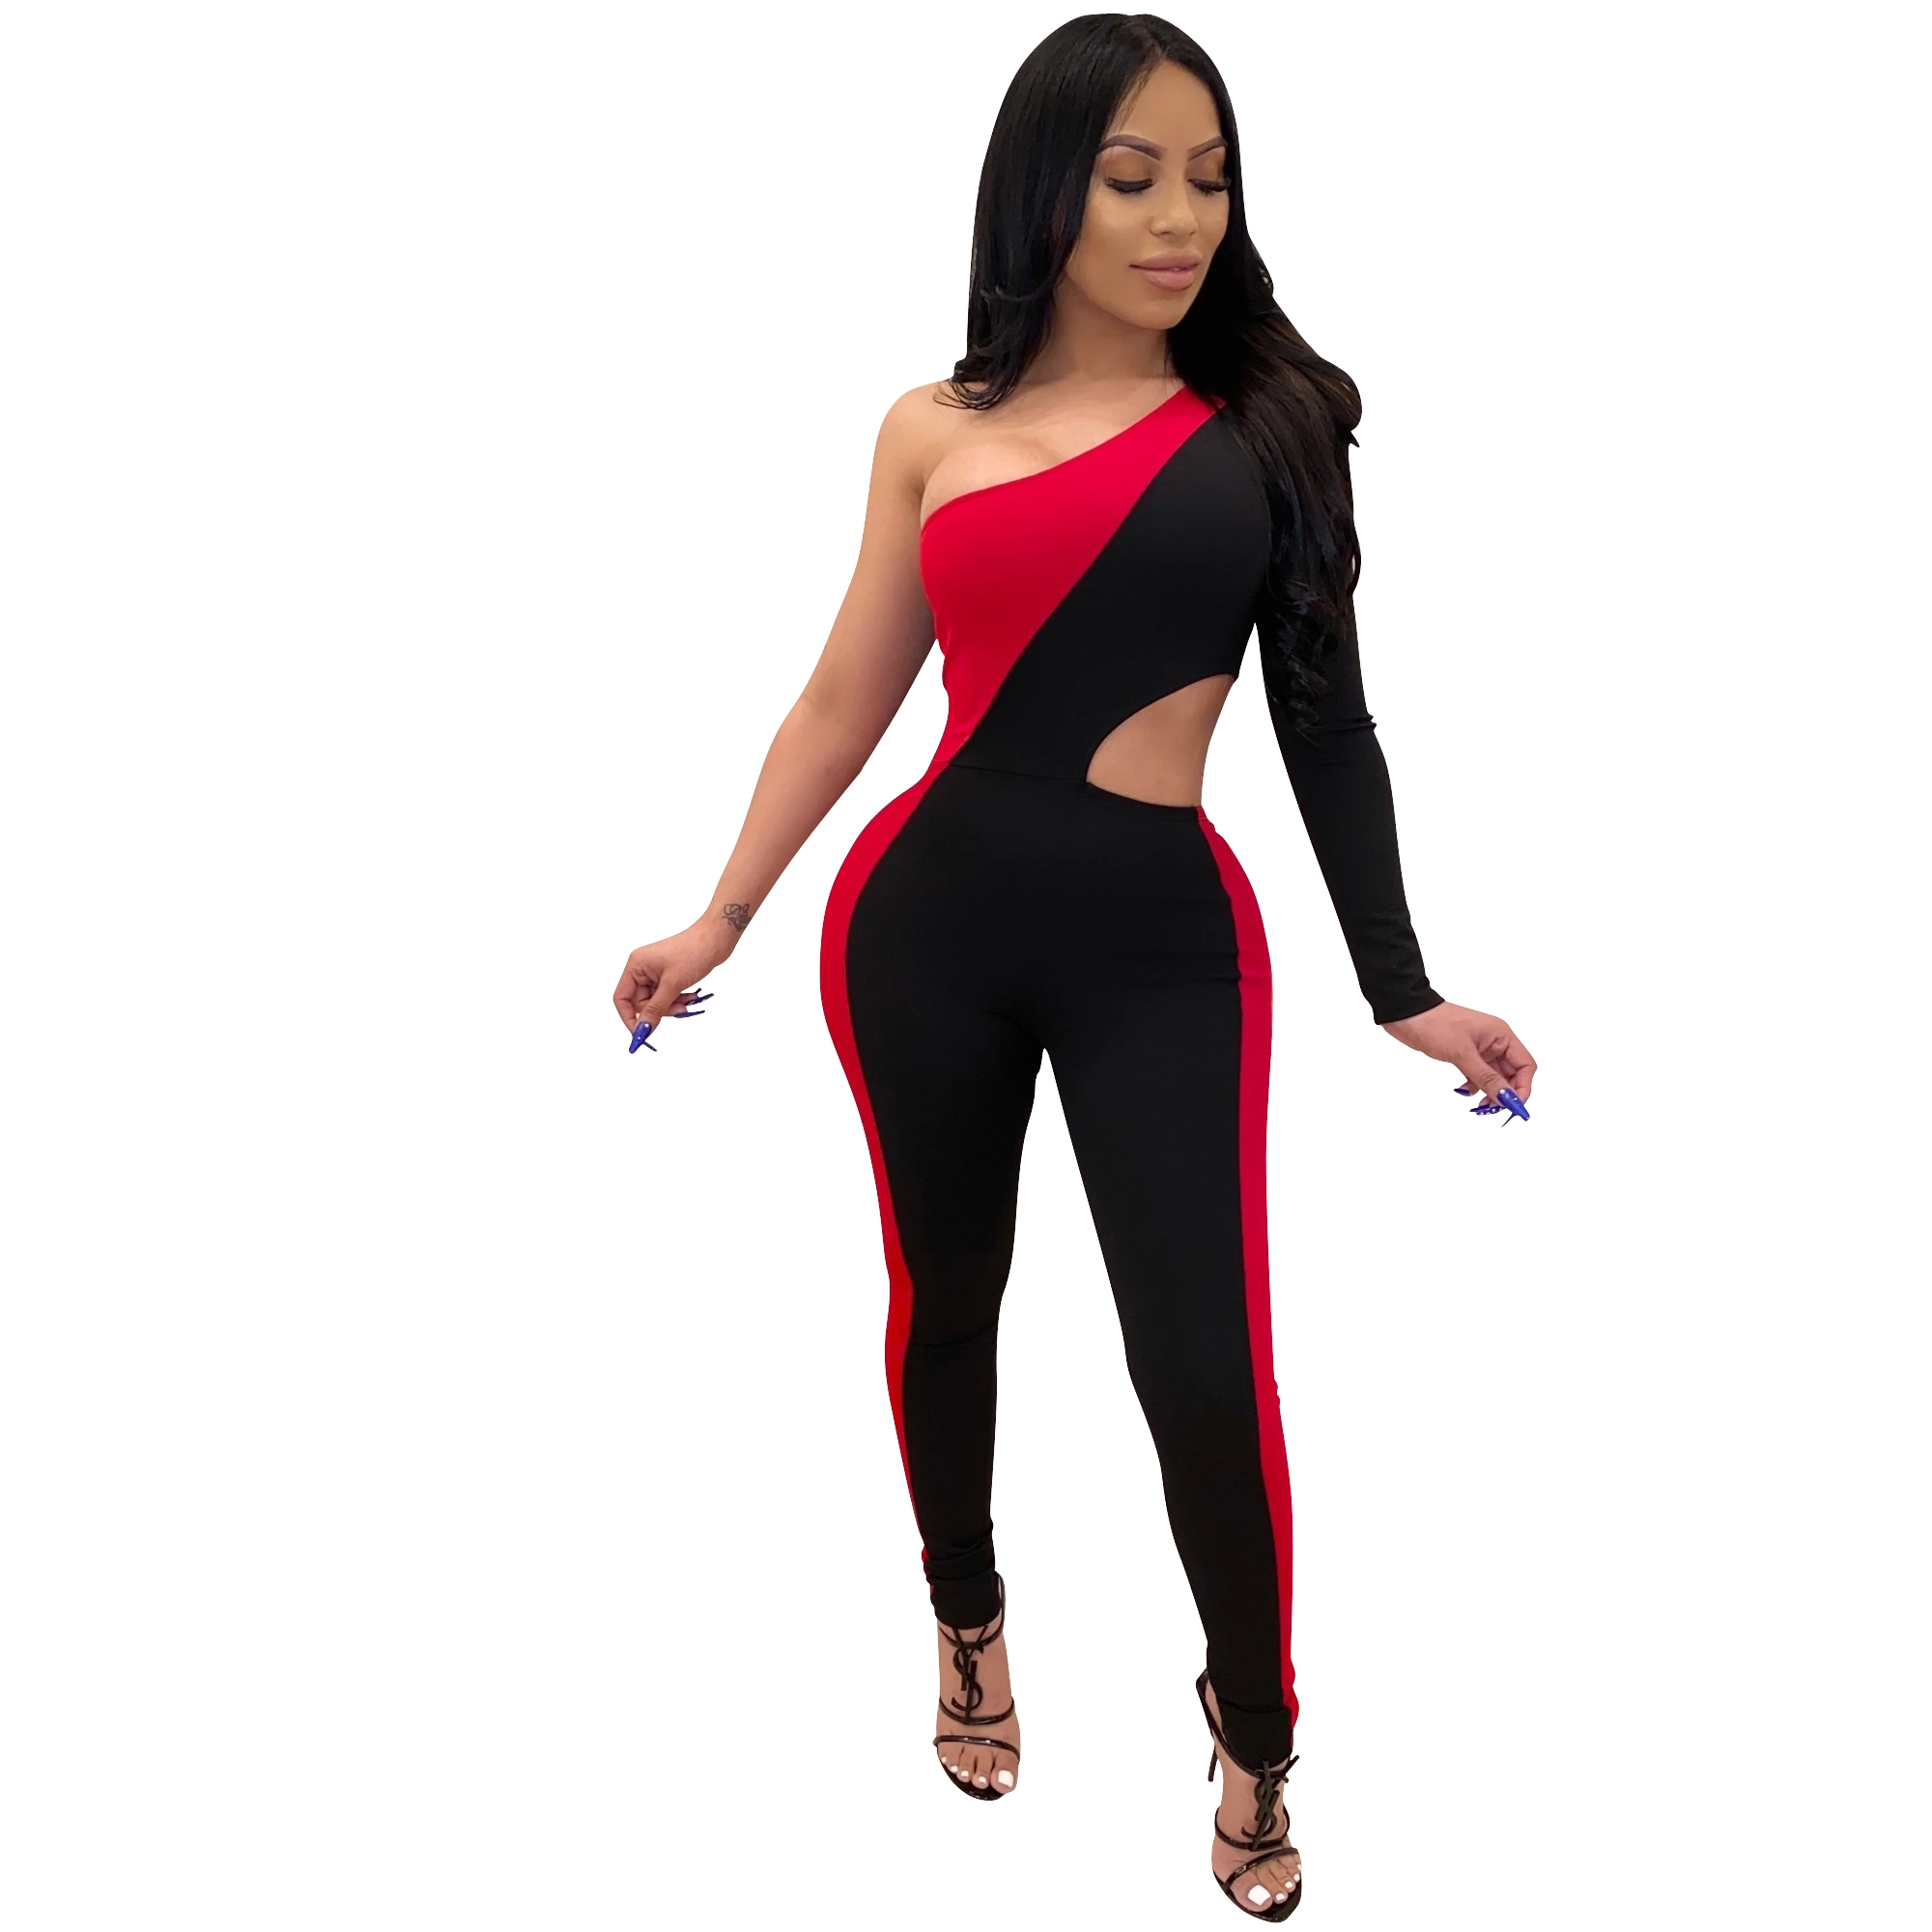 Two Tone One Shoulder Cutout Sexy Jumpsuit US$ 6.67 - www.lover-pretty.com